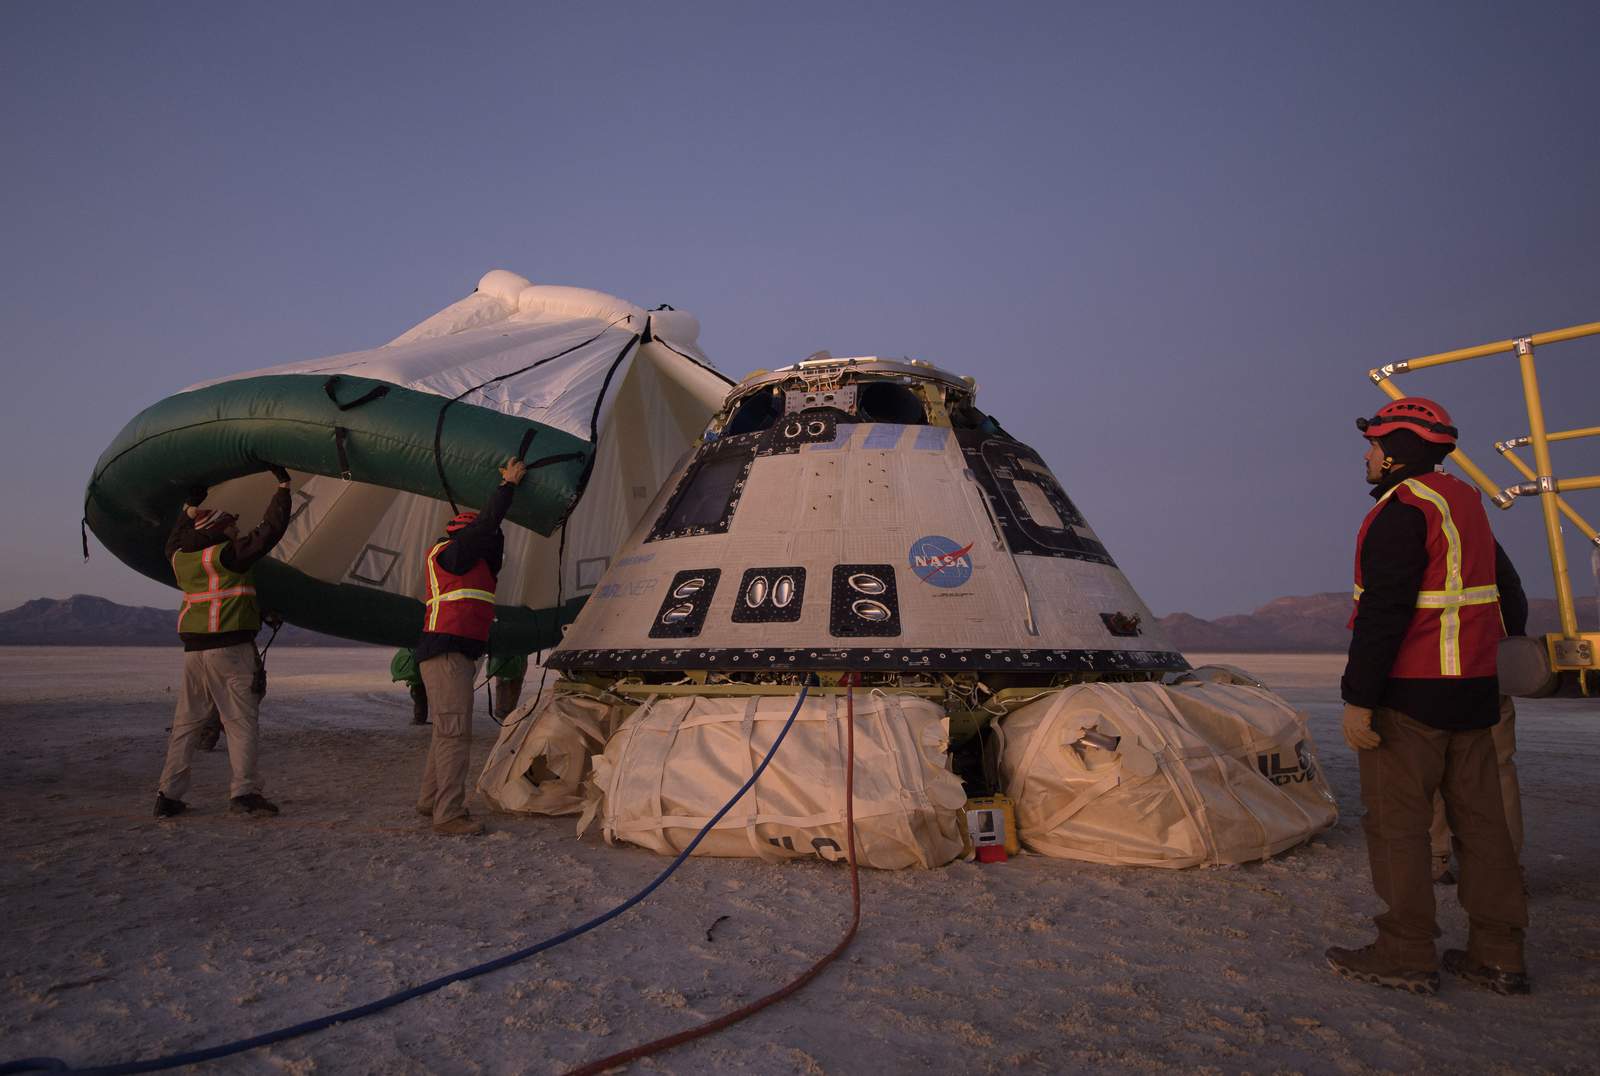 Boeing astronaut capsule could have been destroyed due to software issue, NASA says